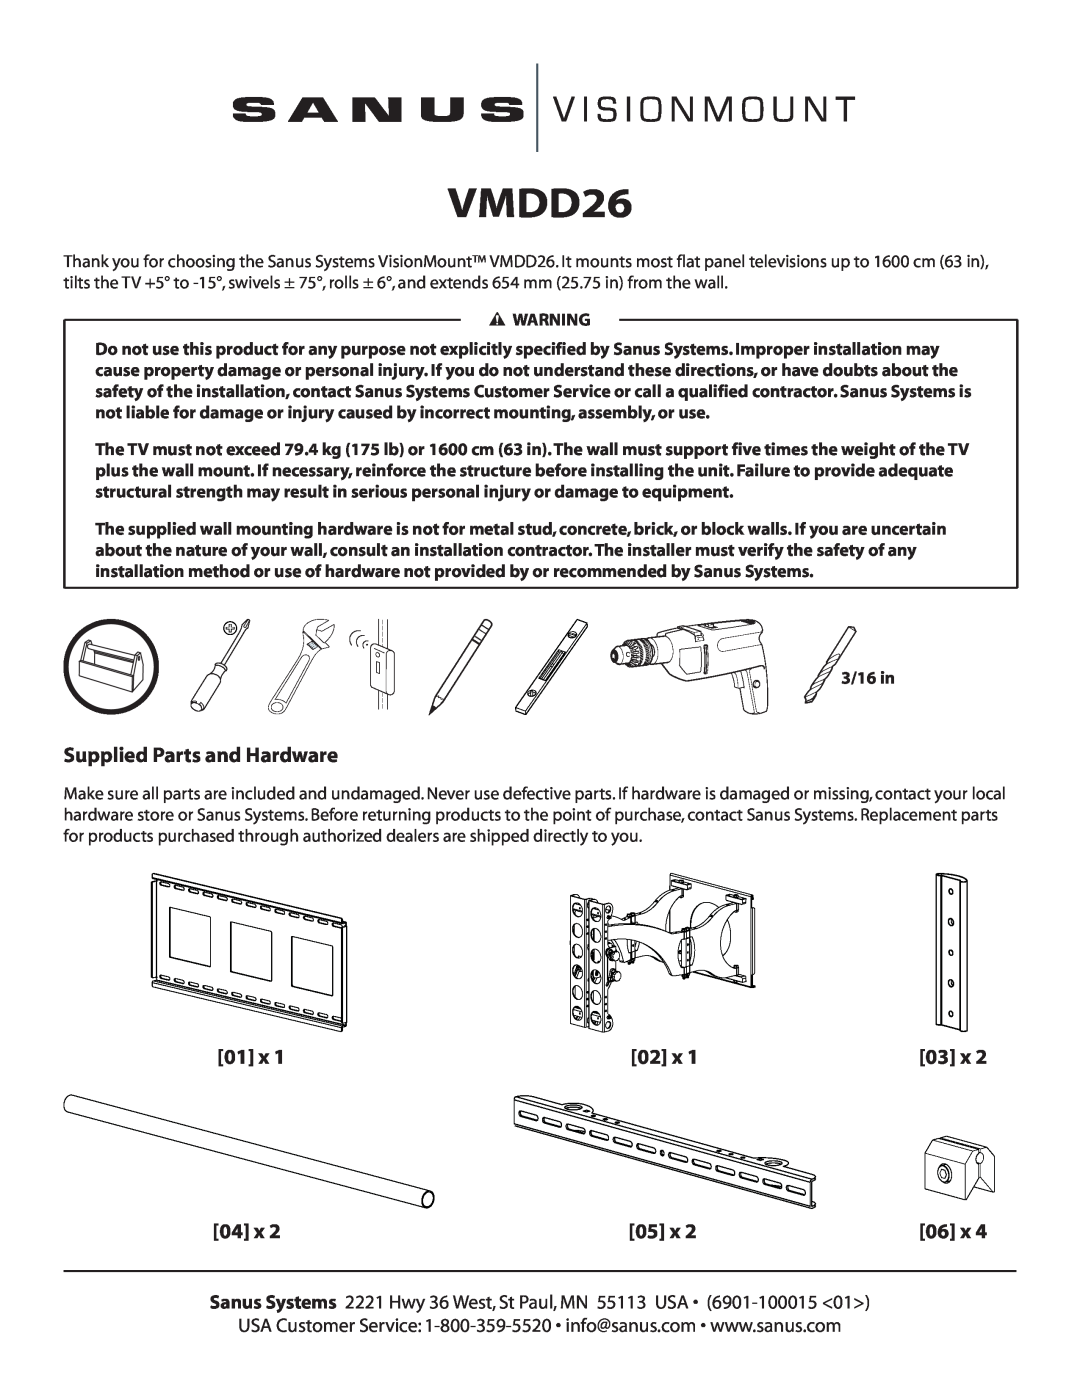 Sanus Systems VMDD26 manual Supplied Parts and Hardware 